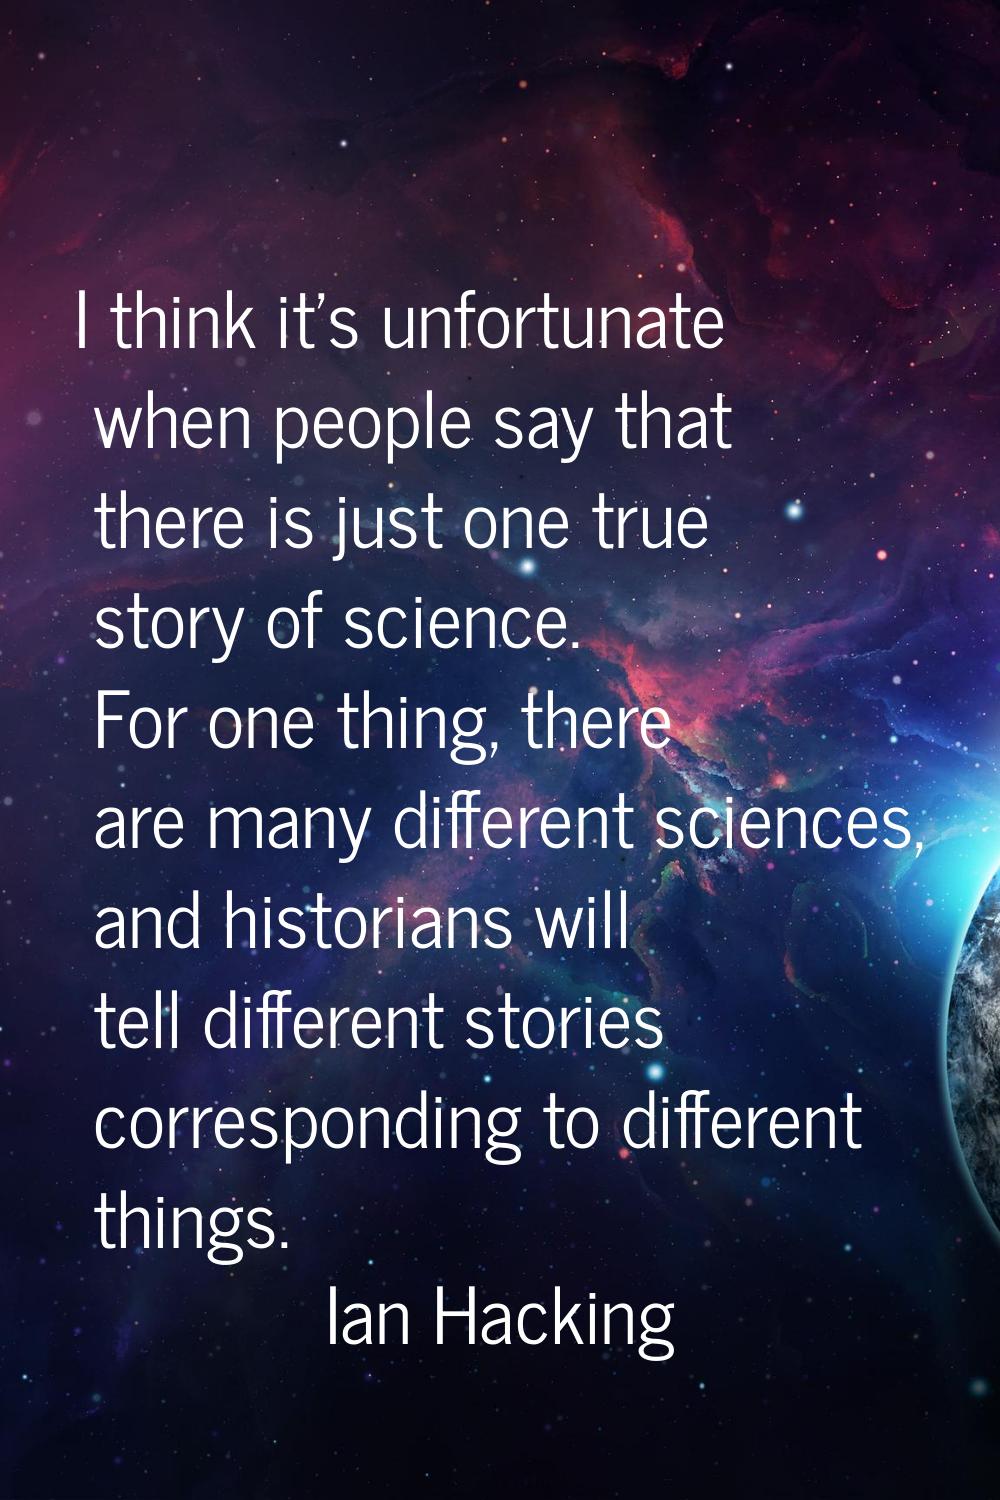 I think it's unfortunate when people say that there is just one true story of science. For one thin